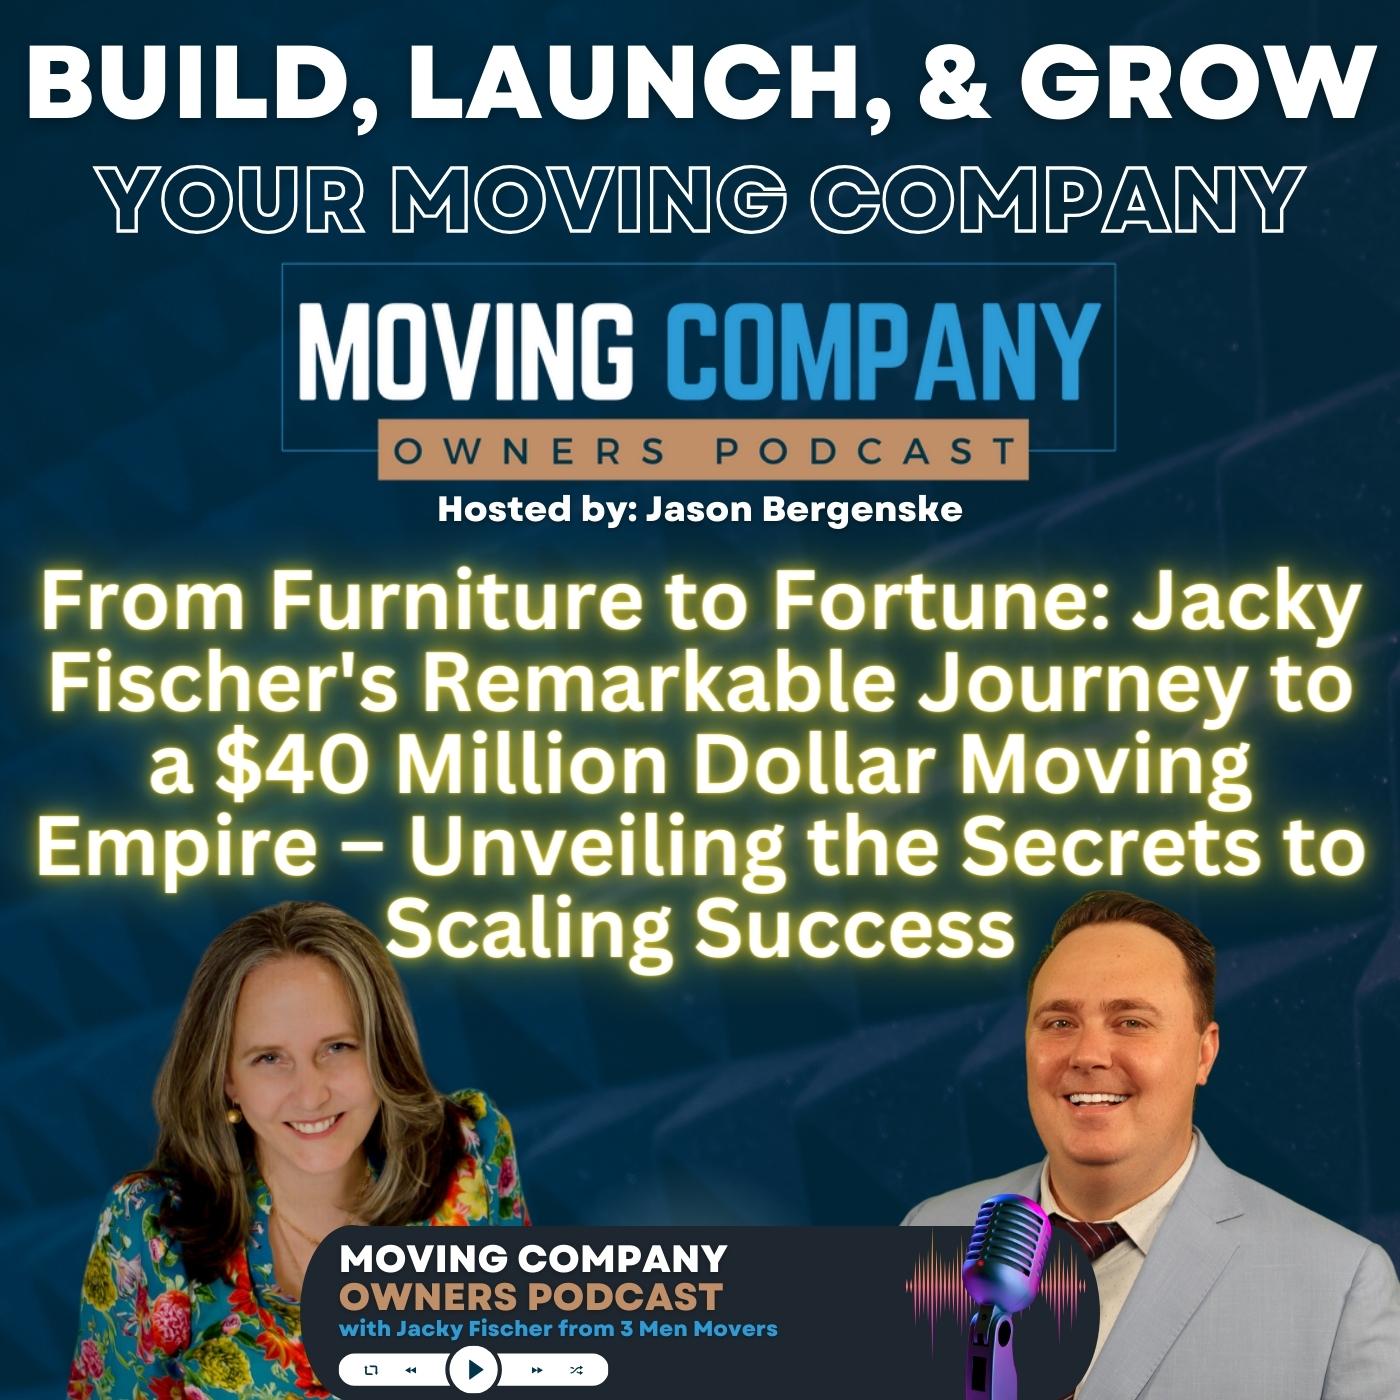 From Furniture to Fortune: Jacky Fischer's Remarkable Journey to a $40 Million Dollar Moving Empire – Unveiling the Secrets to Scaling Success